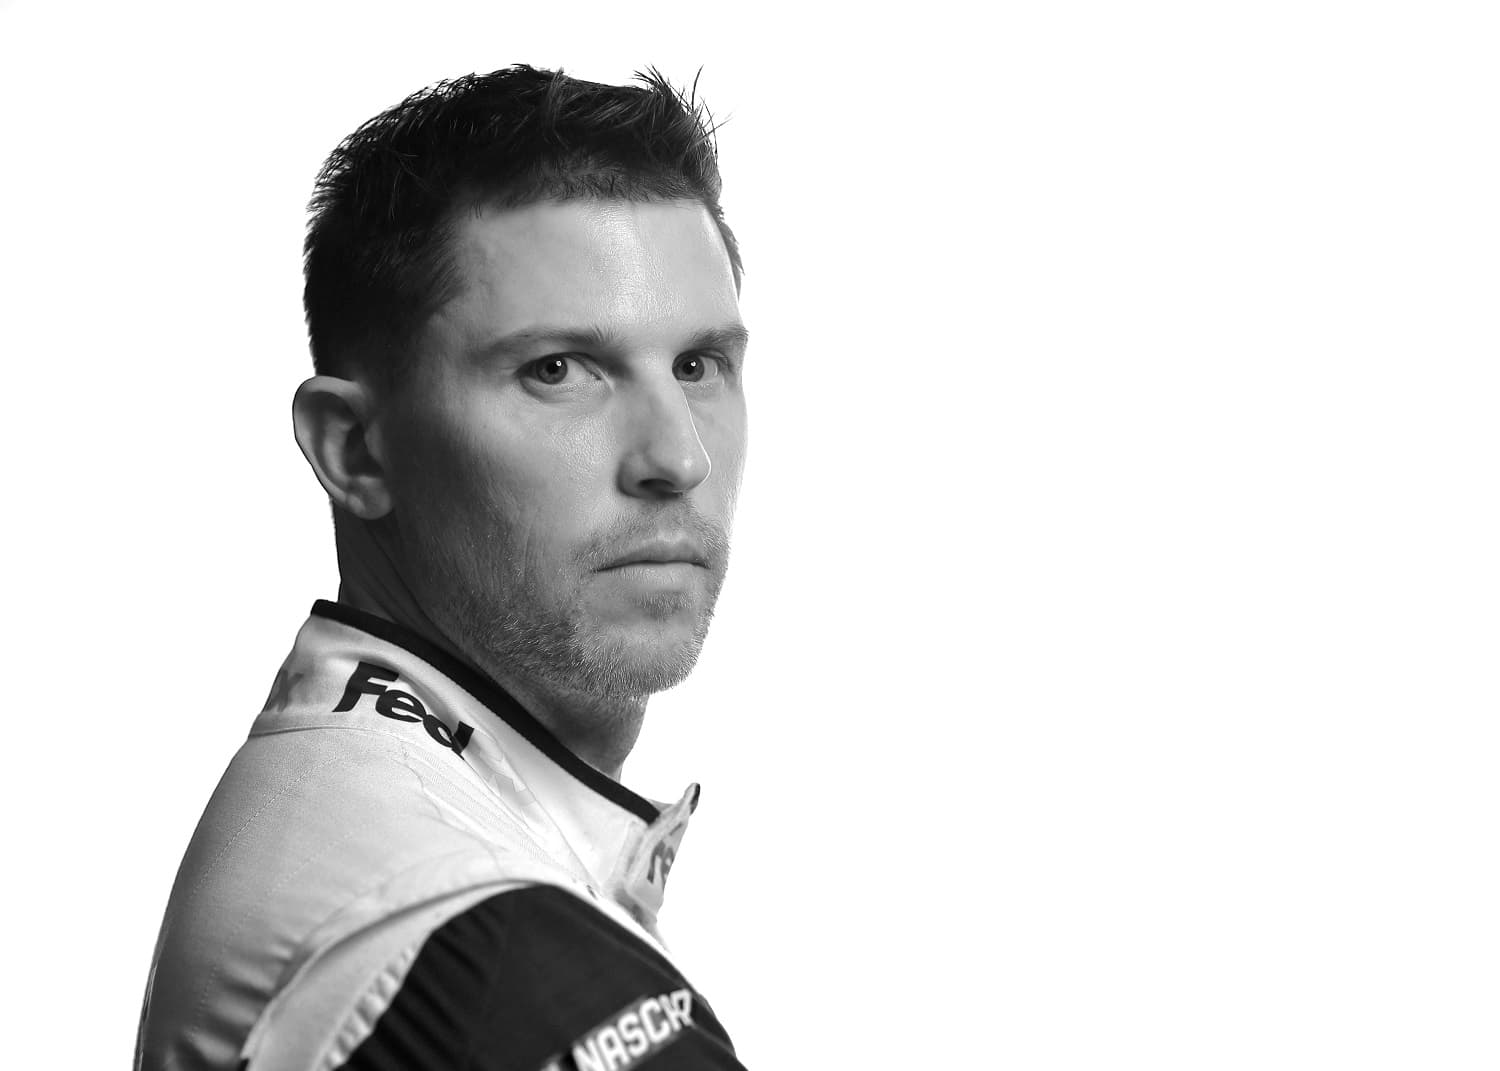 NASCAR driver Denny Hamlin poses for a photo during NASCAR Production Days at Charlotte Convention Center on Jan. 18, 2023 in Charlotte, North Carolina. | Jared C. Tilton/Getty Images)